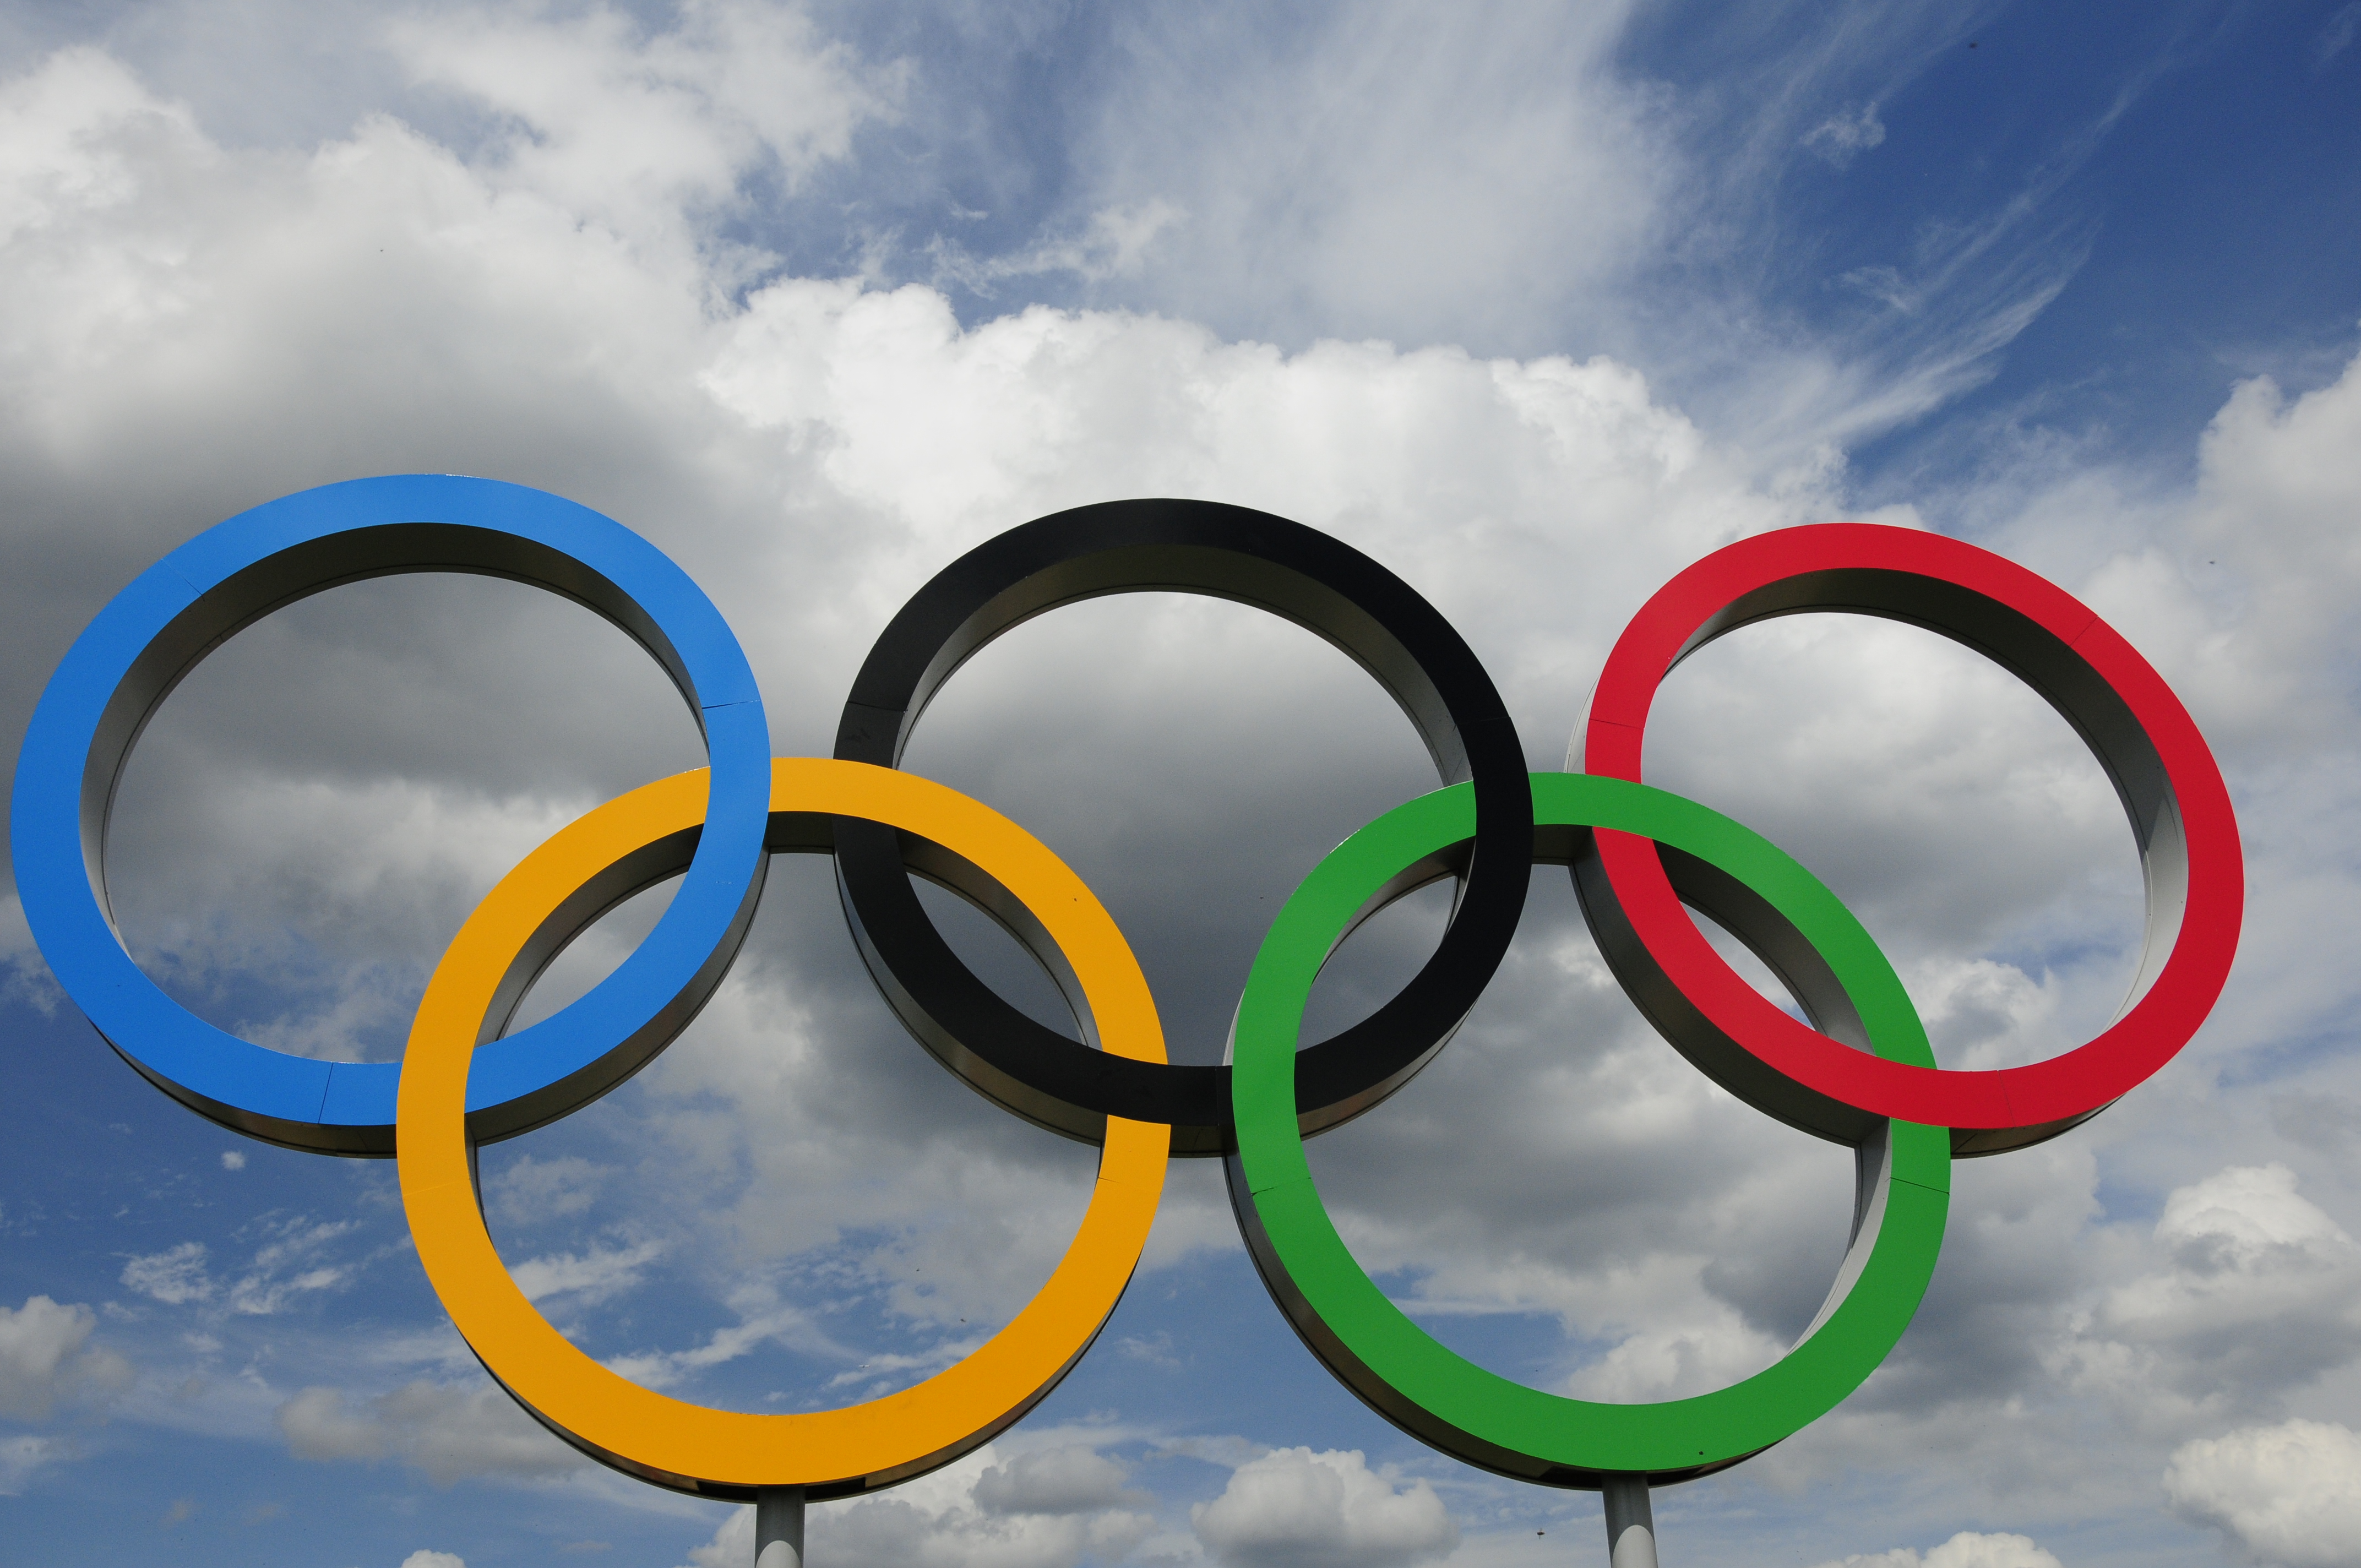 8 Surprising Facts About the Olympic Games